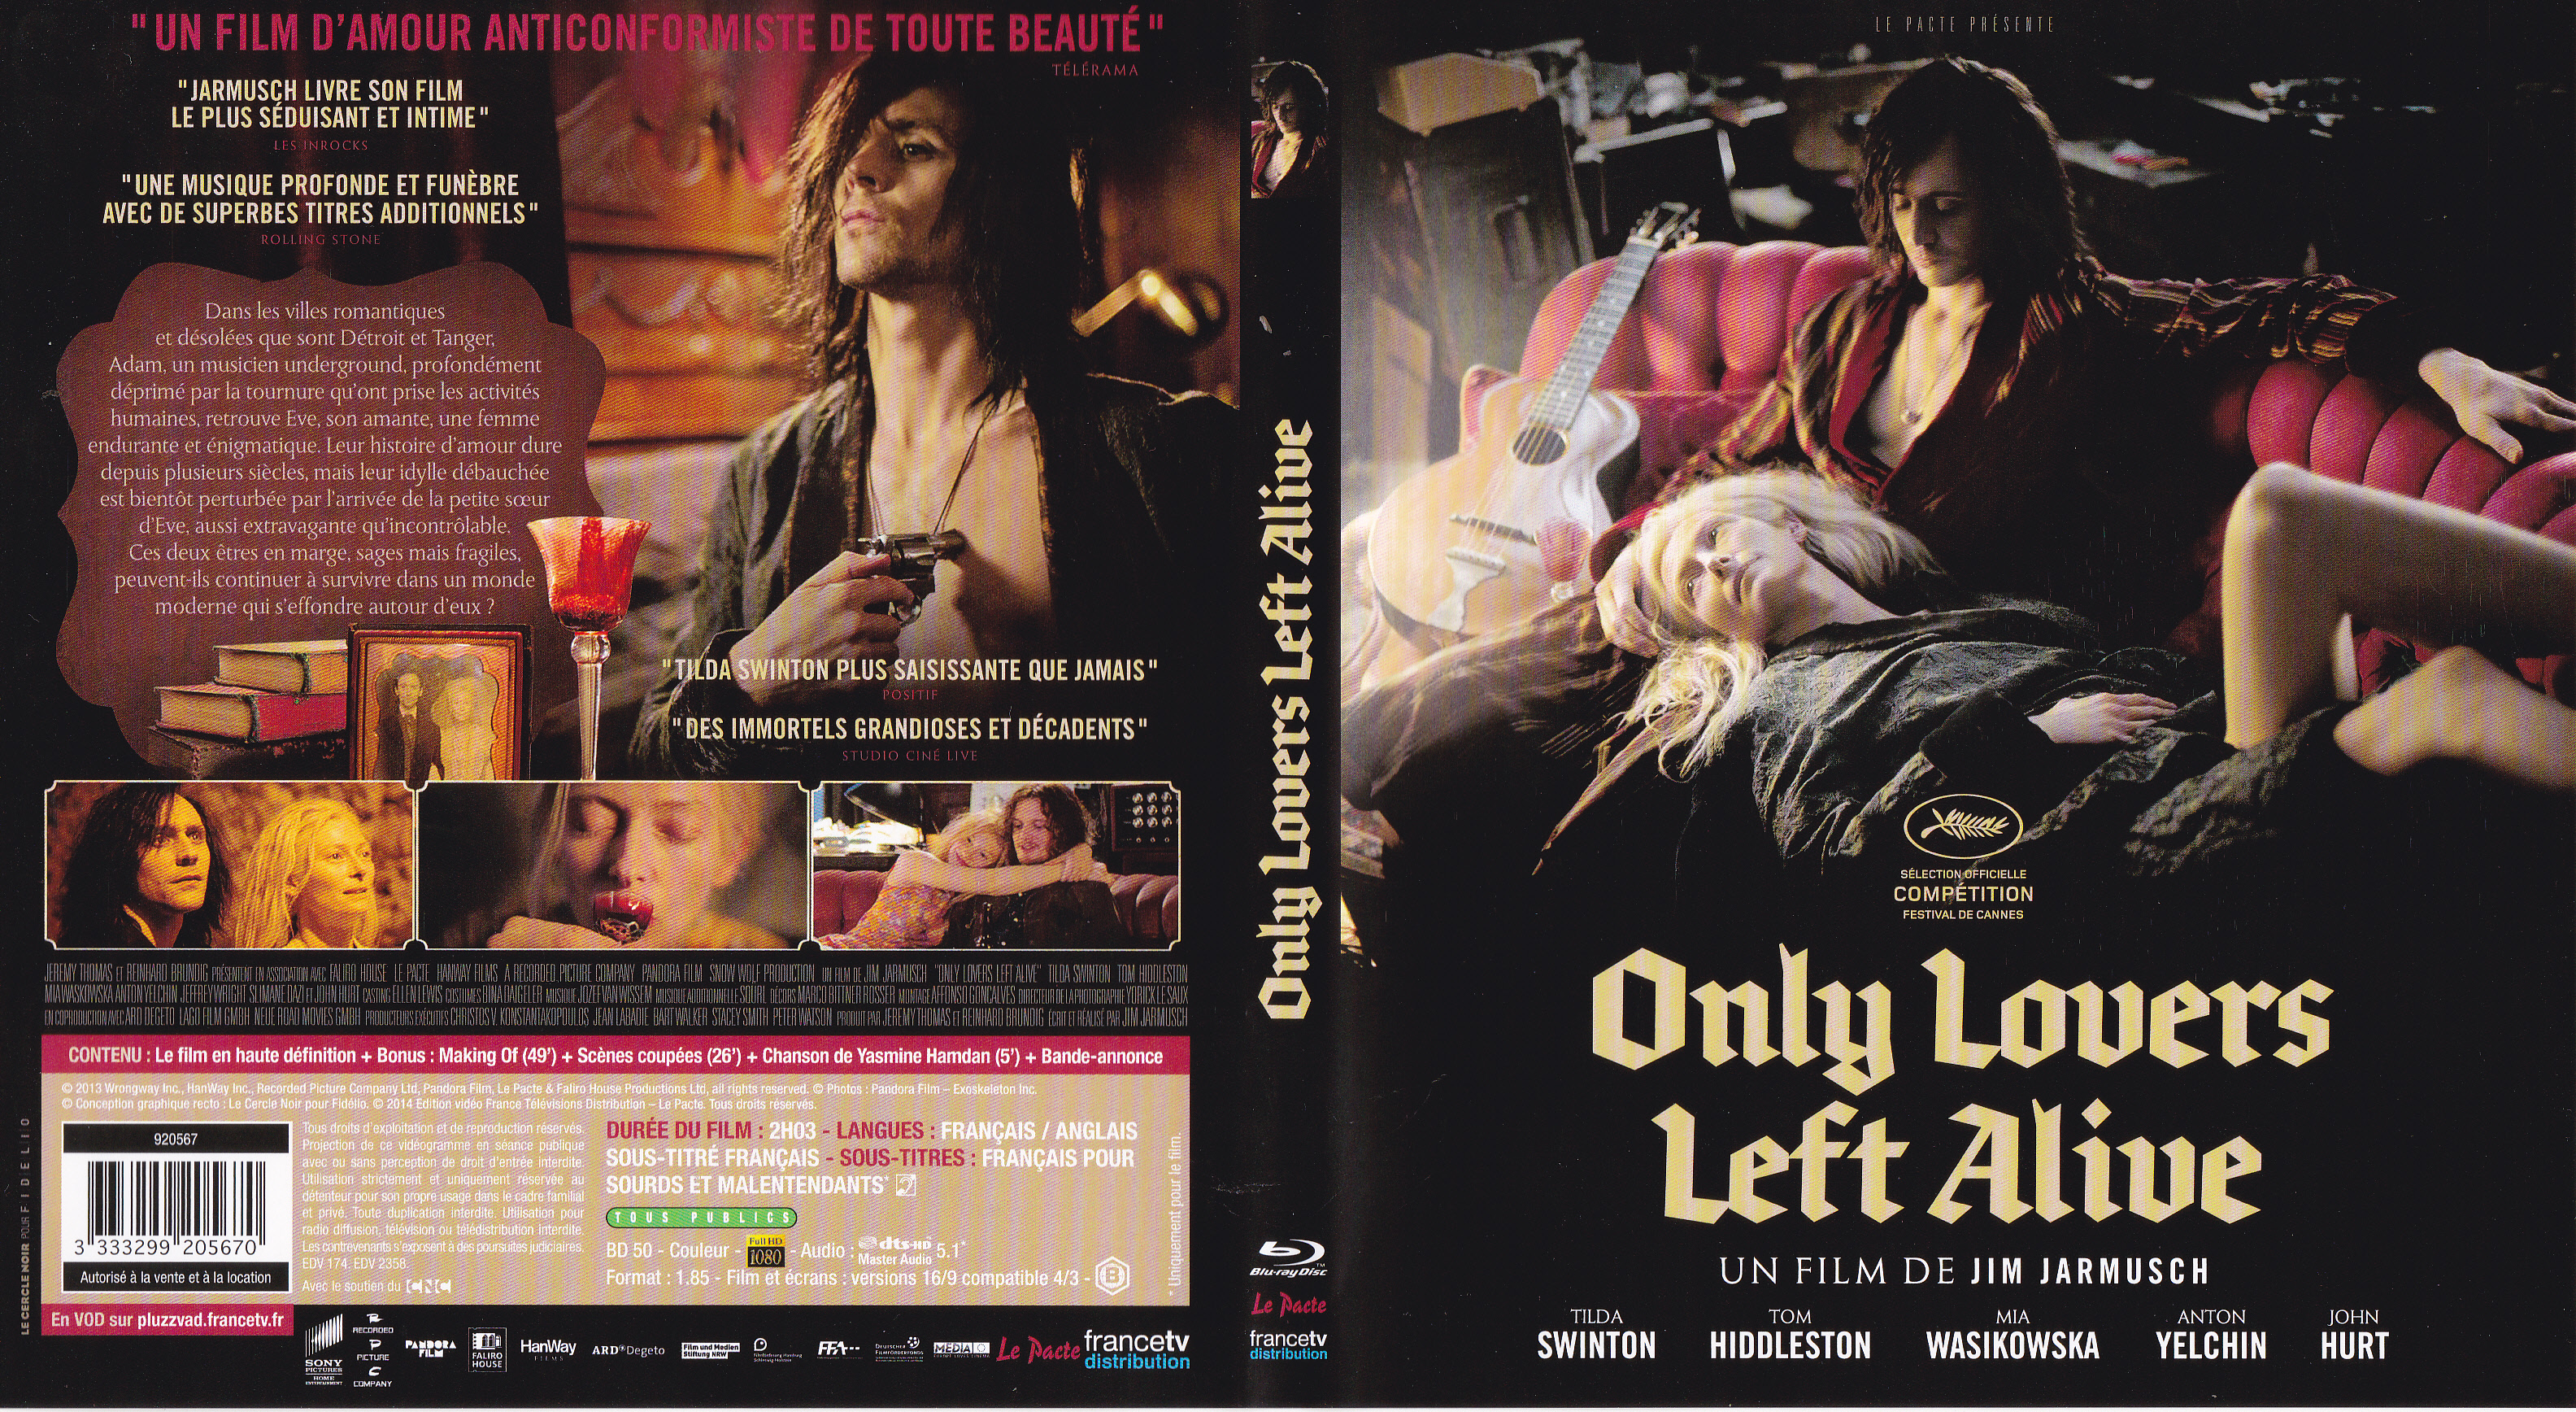 Jaquette DVD Only Lovers Left Alive (BLU-RAY)